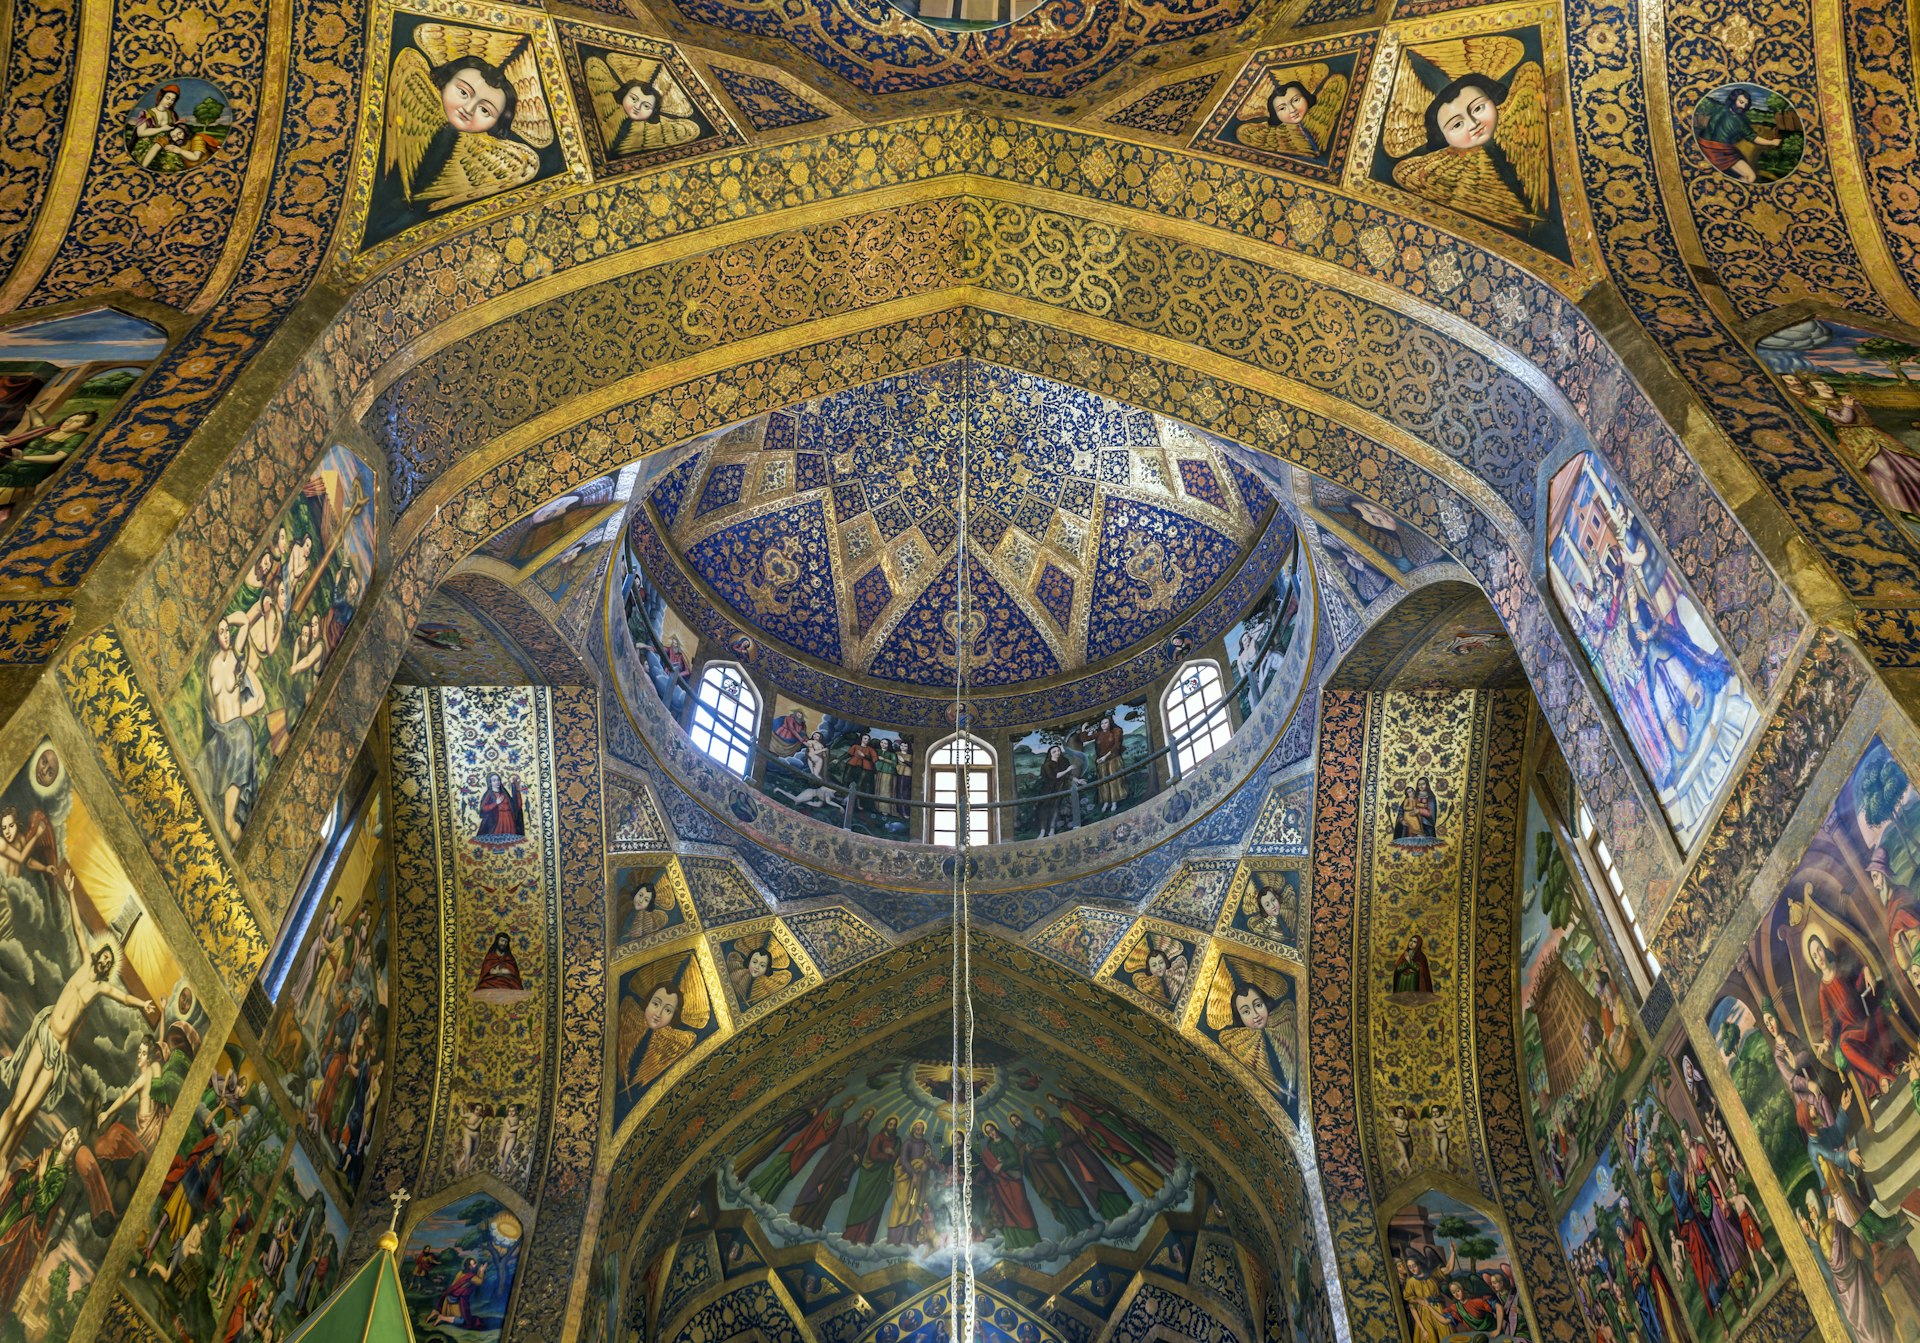 Holy Savior Cathedral, also known as Vank Cathedral and The Church of the Saintly Sisters, is a cathedral in Isfahan, Iran. Image by Izzet Keribar / Lonely Planet